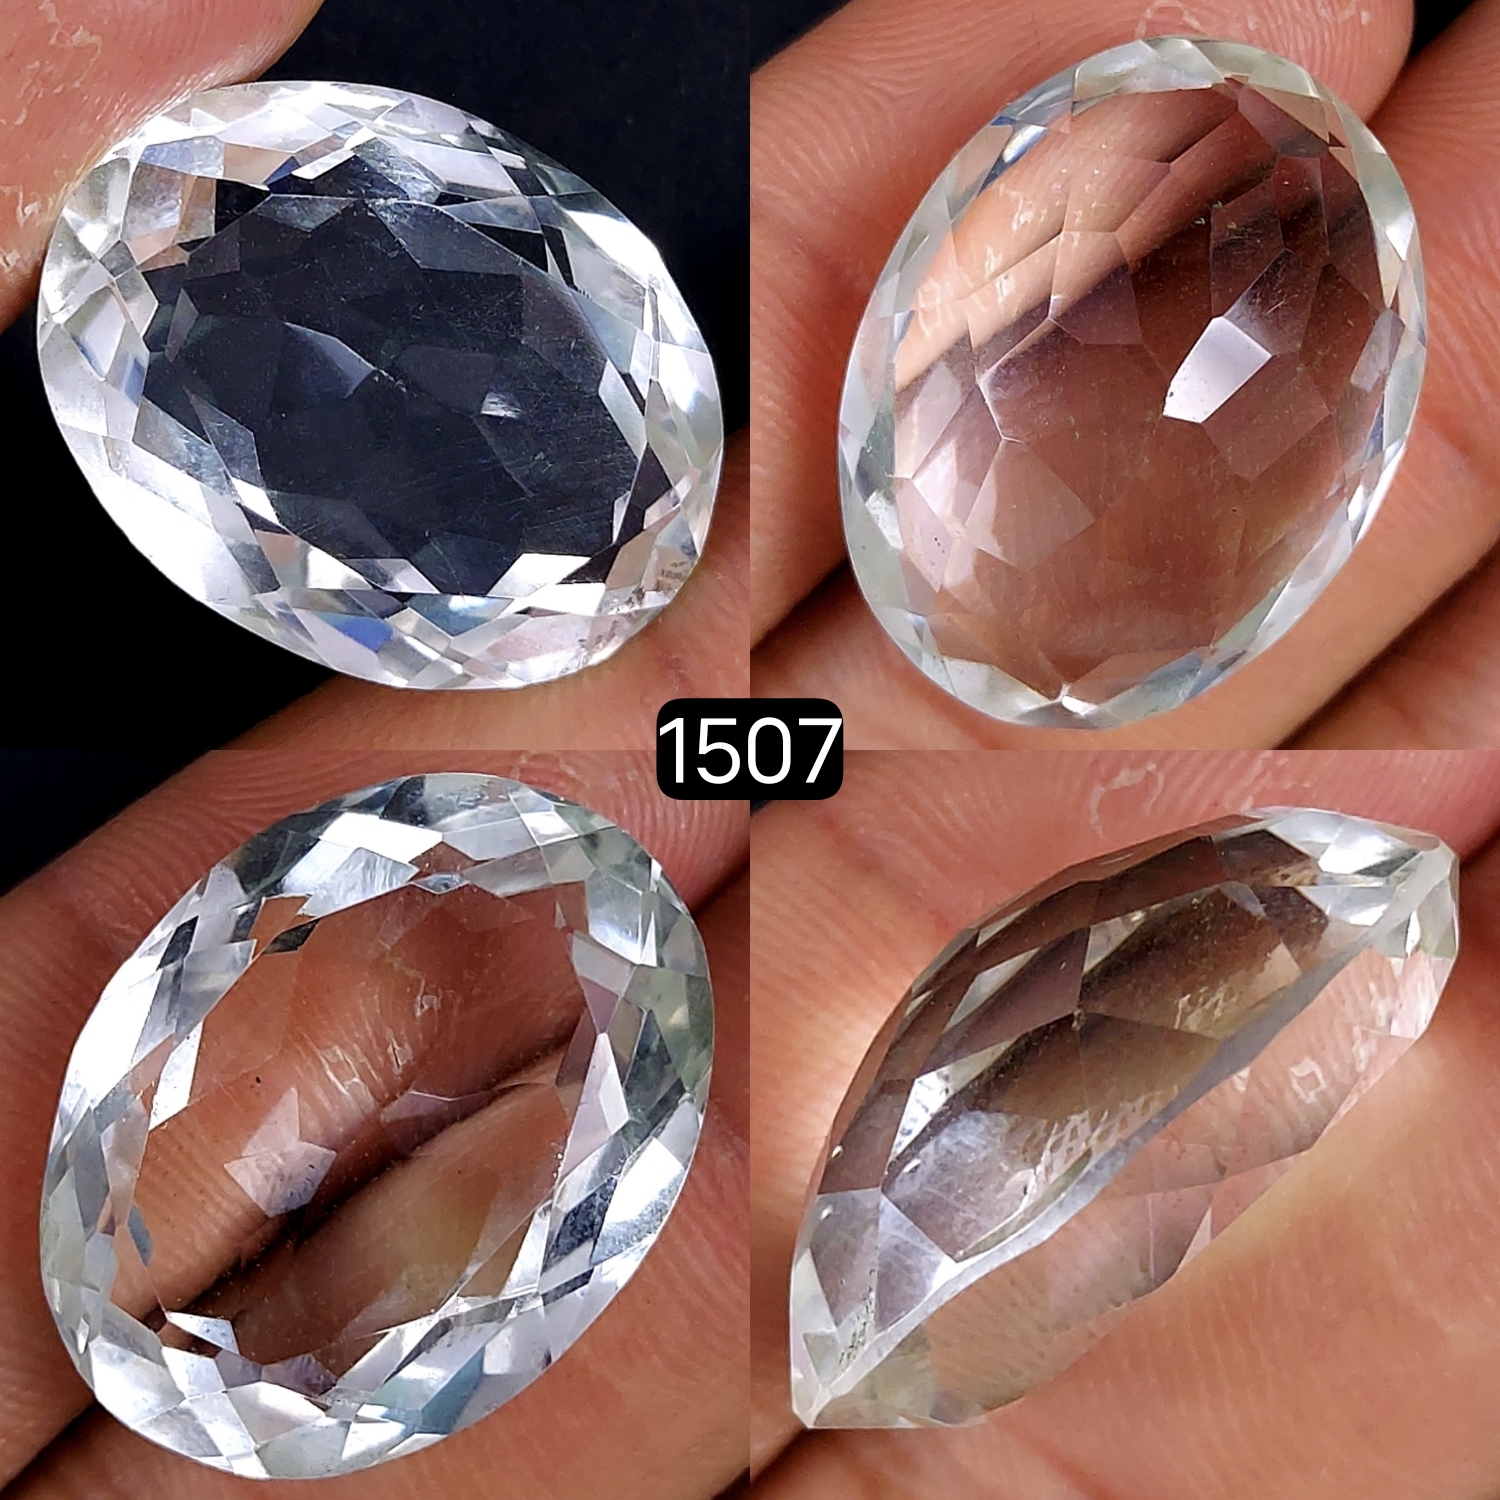 1Pcs 39Cts Natural Crystal Quartz Faceted Oval Shape Loose Gemstone25x18mm#1507